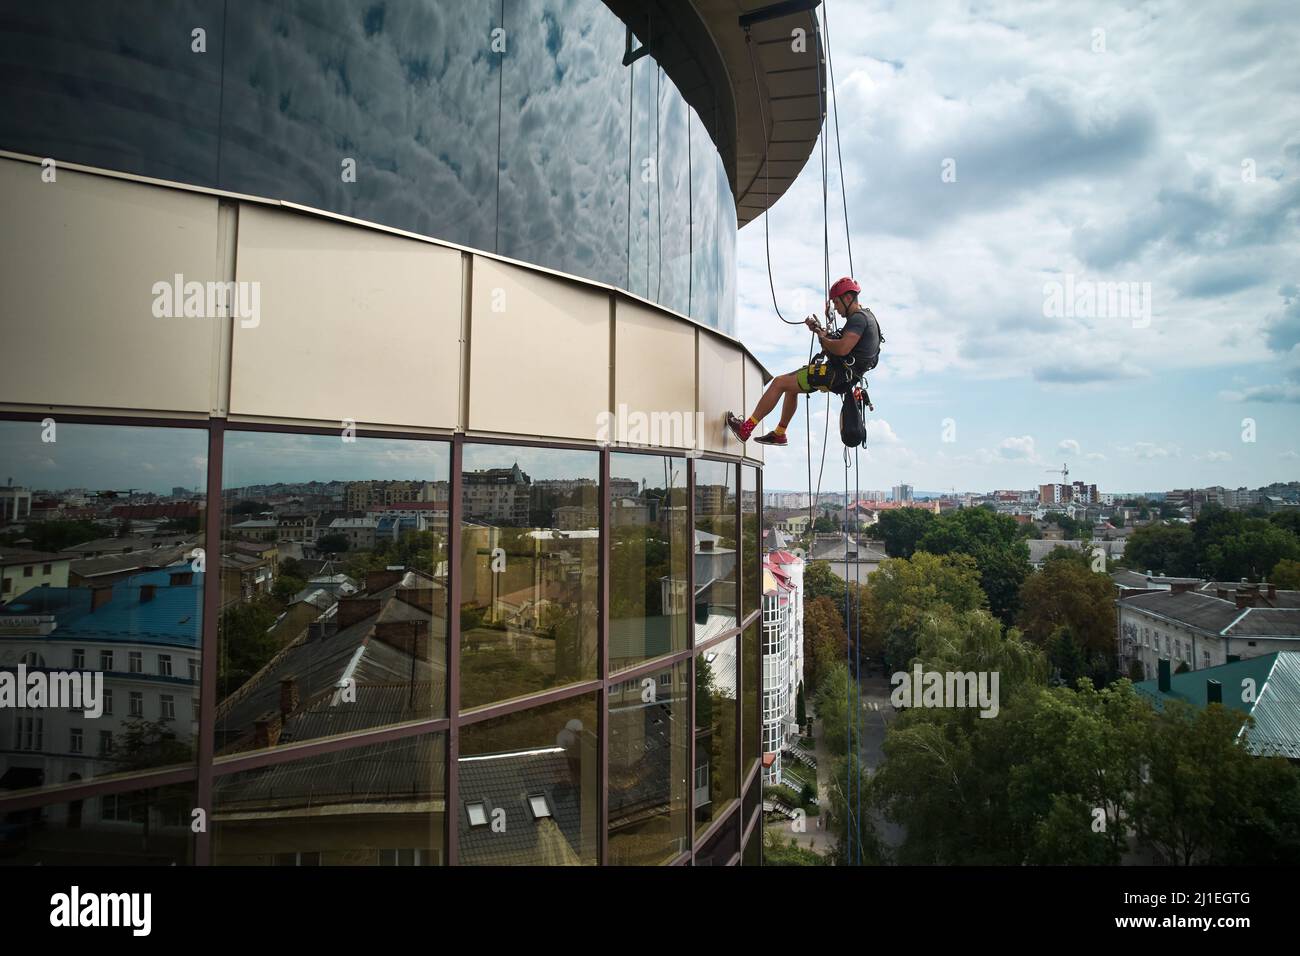 Industrial mountaineering worker cleaning glass window of high-rise building. Male cleaner using safety lifting equipment while washing window of skyscraper. Stock Photo